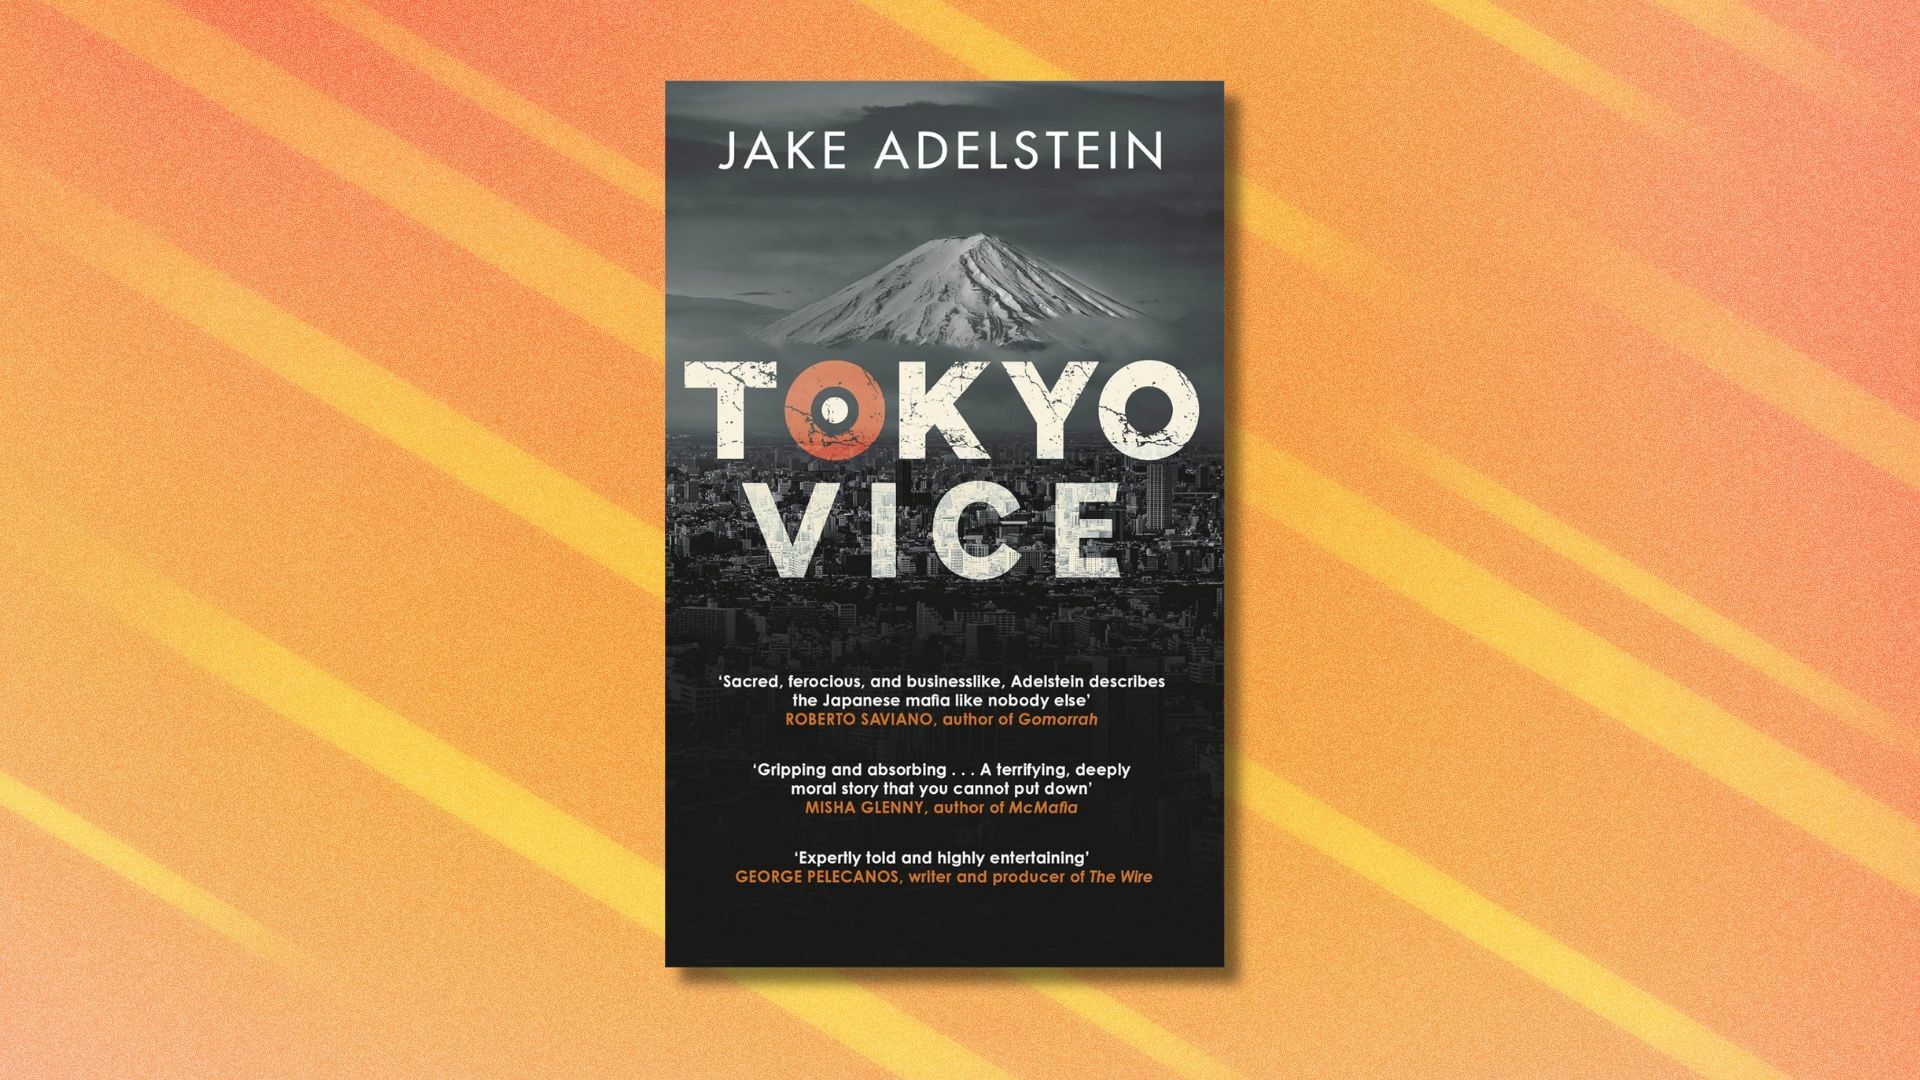 an image of the tokyo vice book cover on a background that's orange with lighter orange streaks running across it diagonally